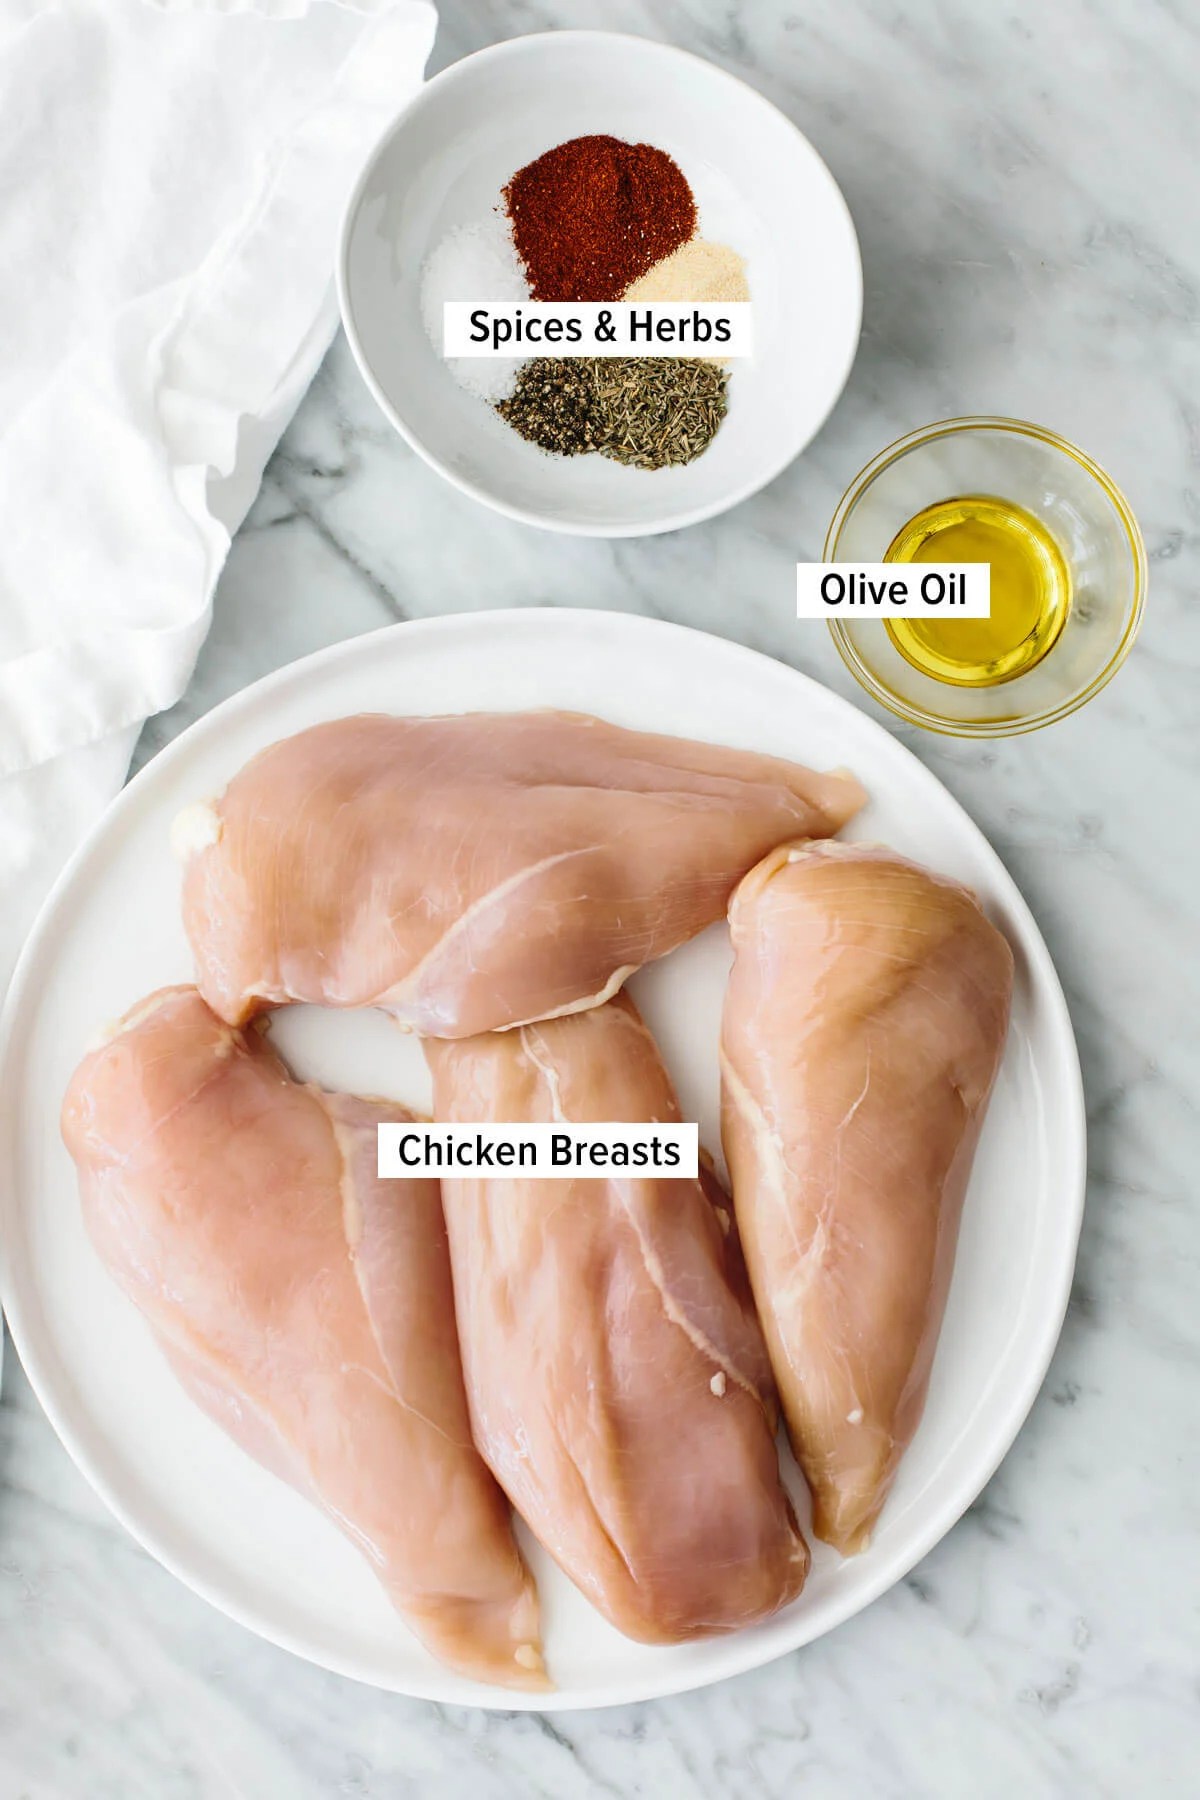 Ingredients for oven baked chicken breasts.